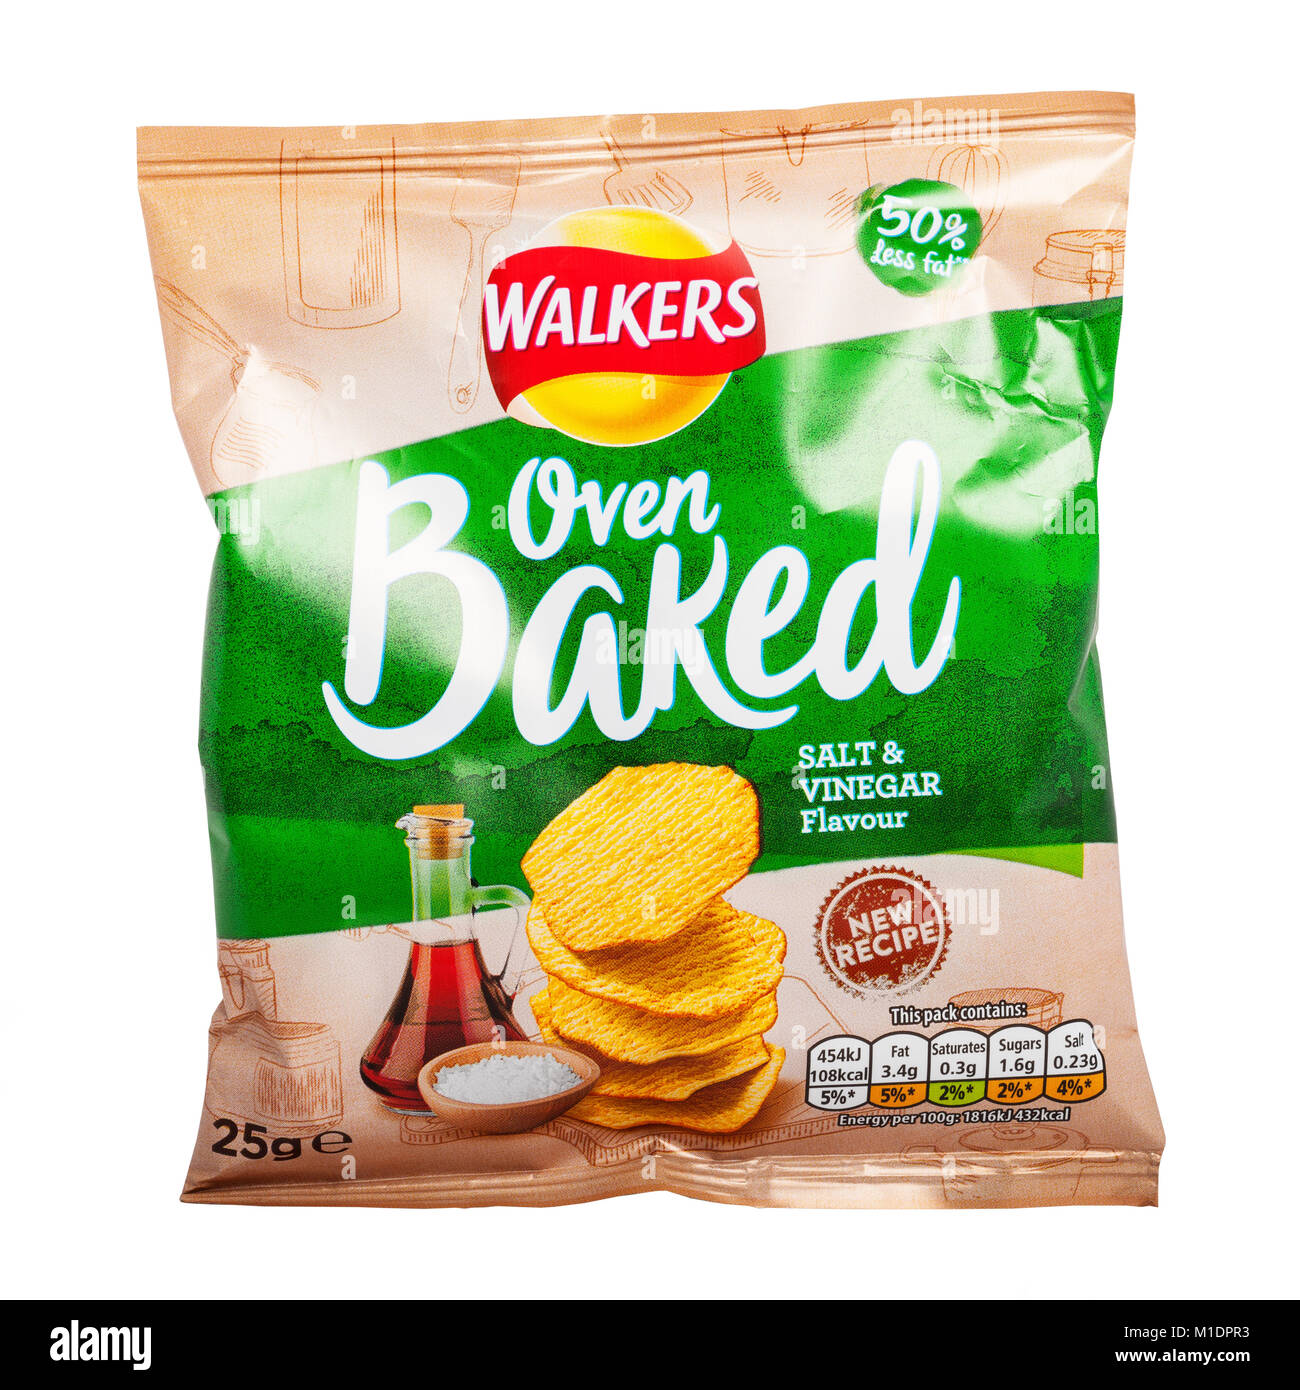 A packet of Walkers oven baked salt & vinegar flavour crisps with 50% less fat on a white background Stock Photo